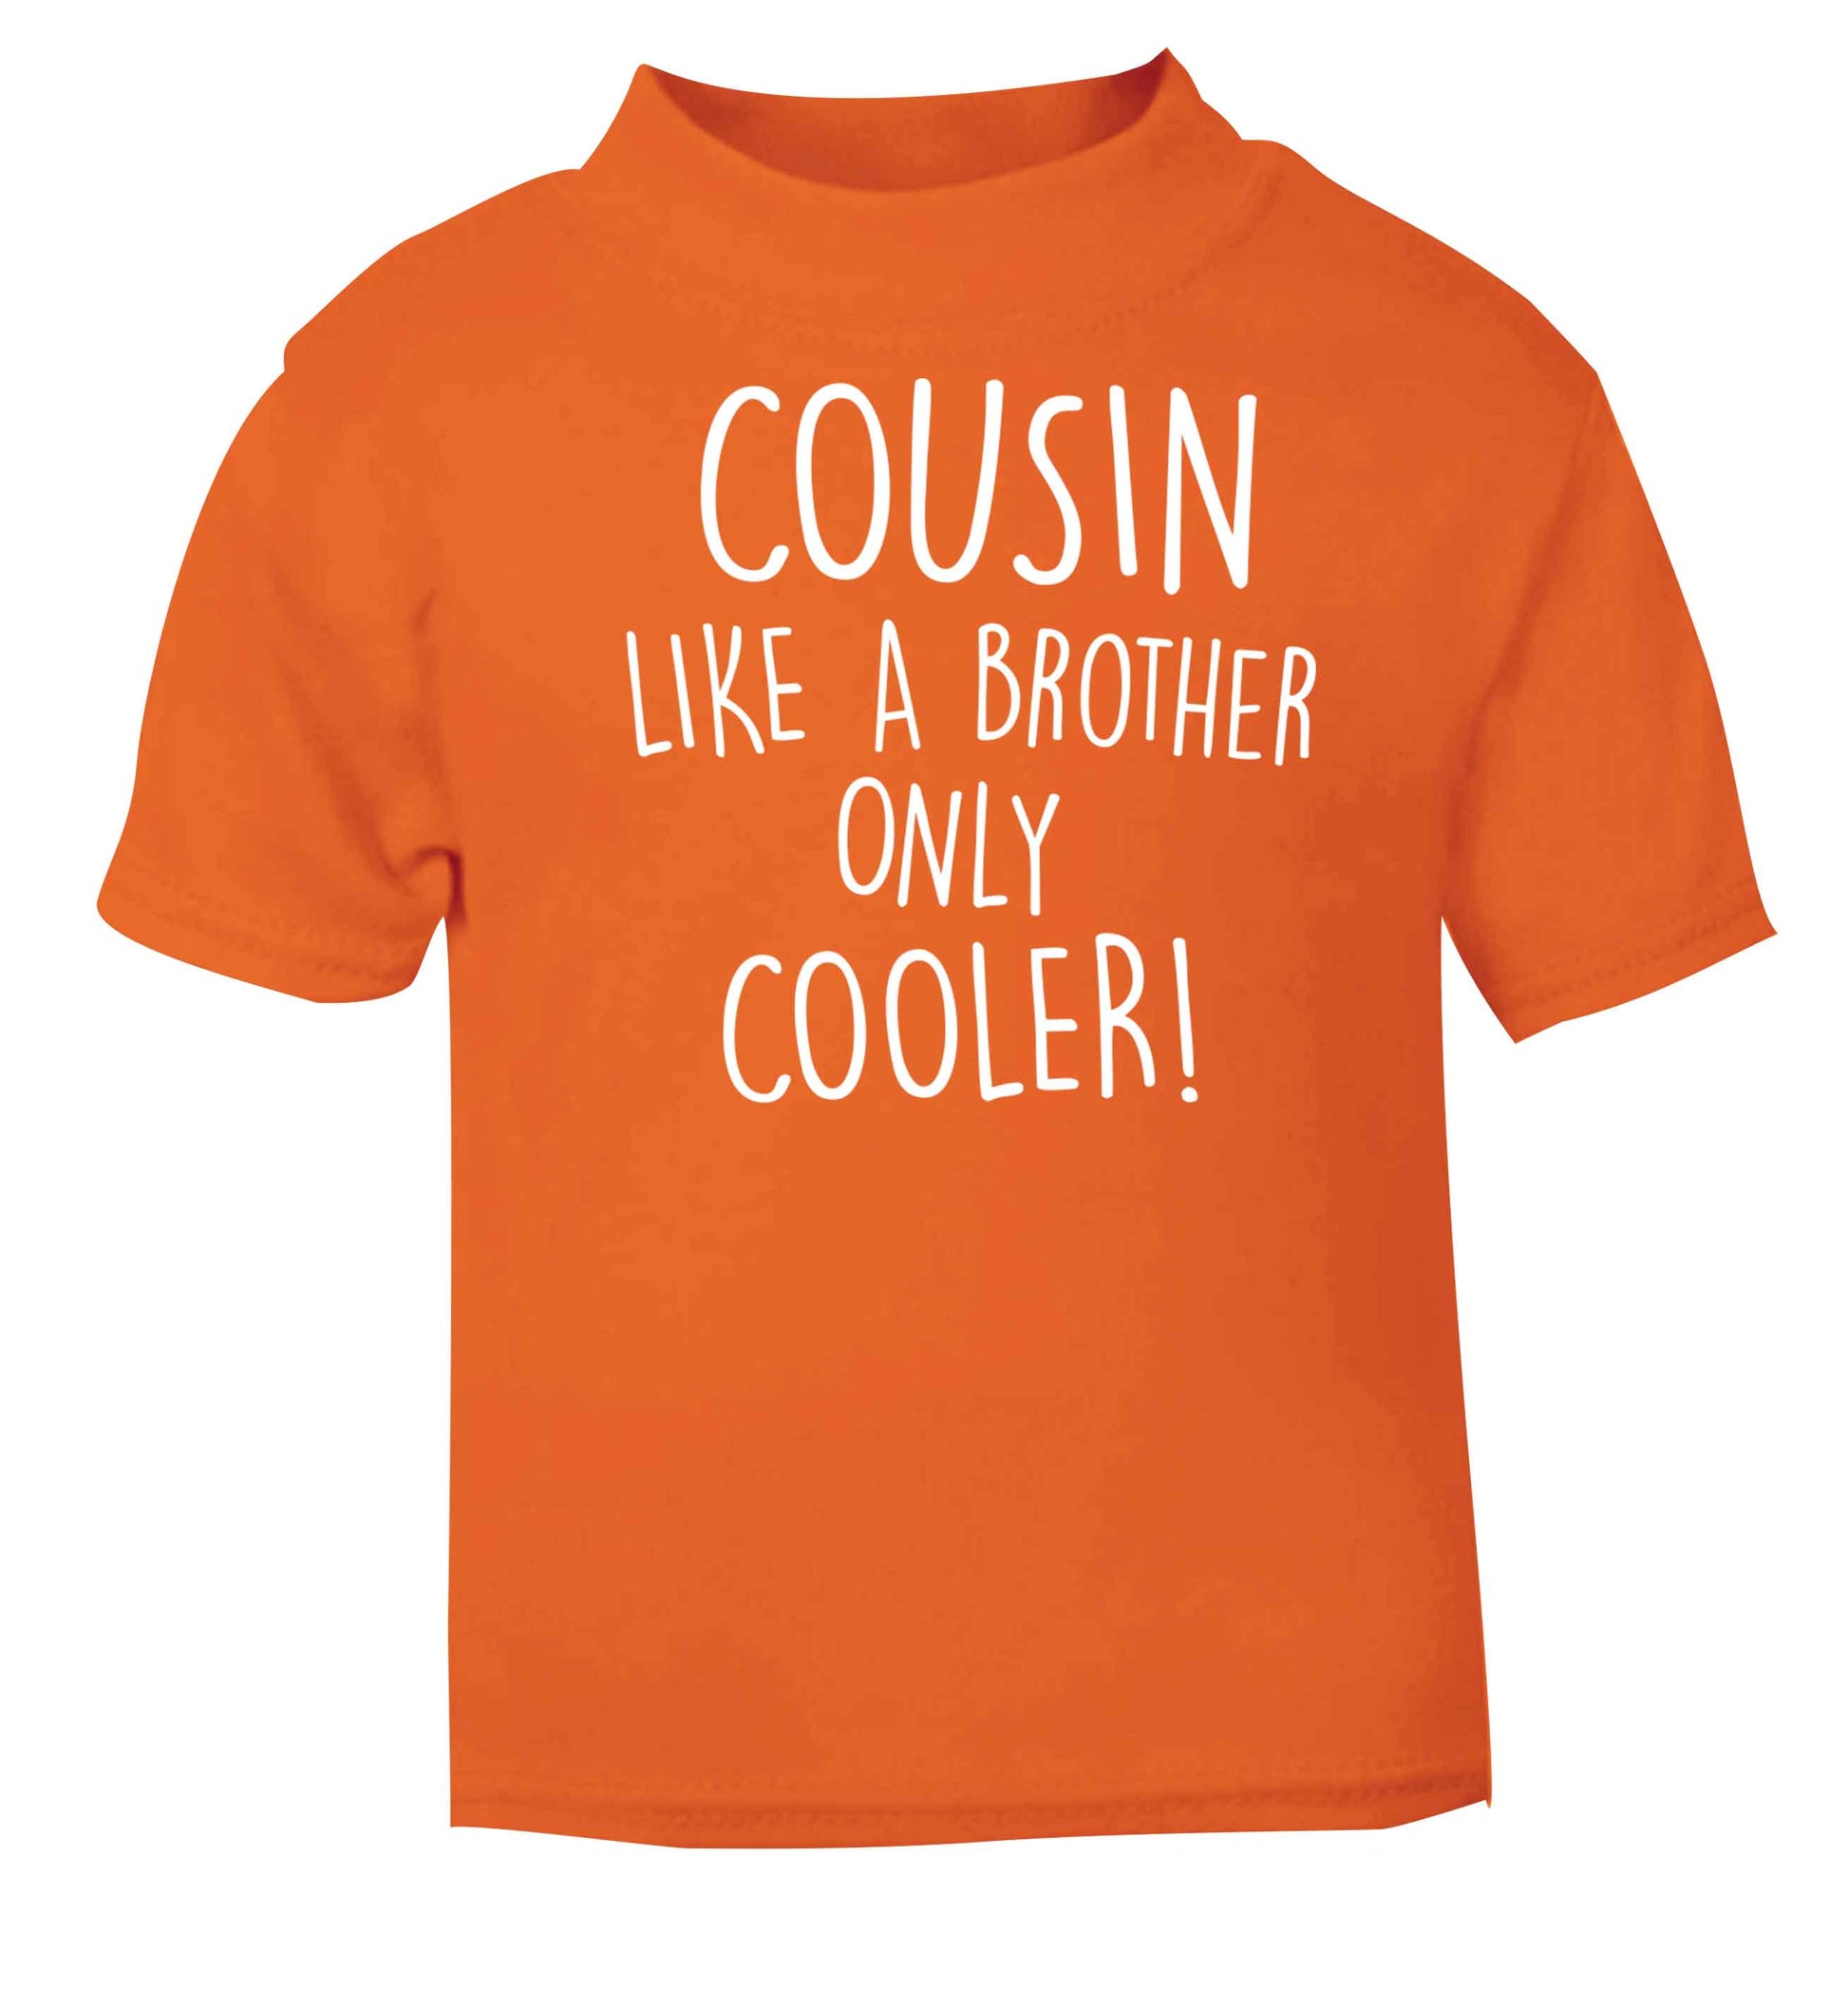 Cousin like a brother only cooler orange baby toddler Tshirt 2 Years